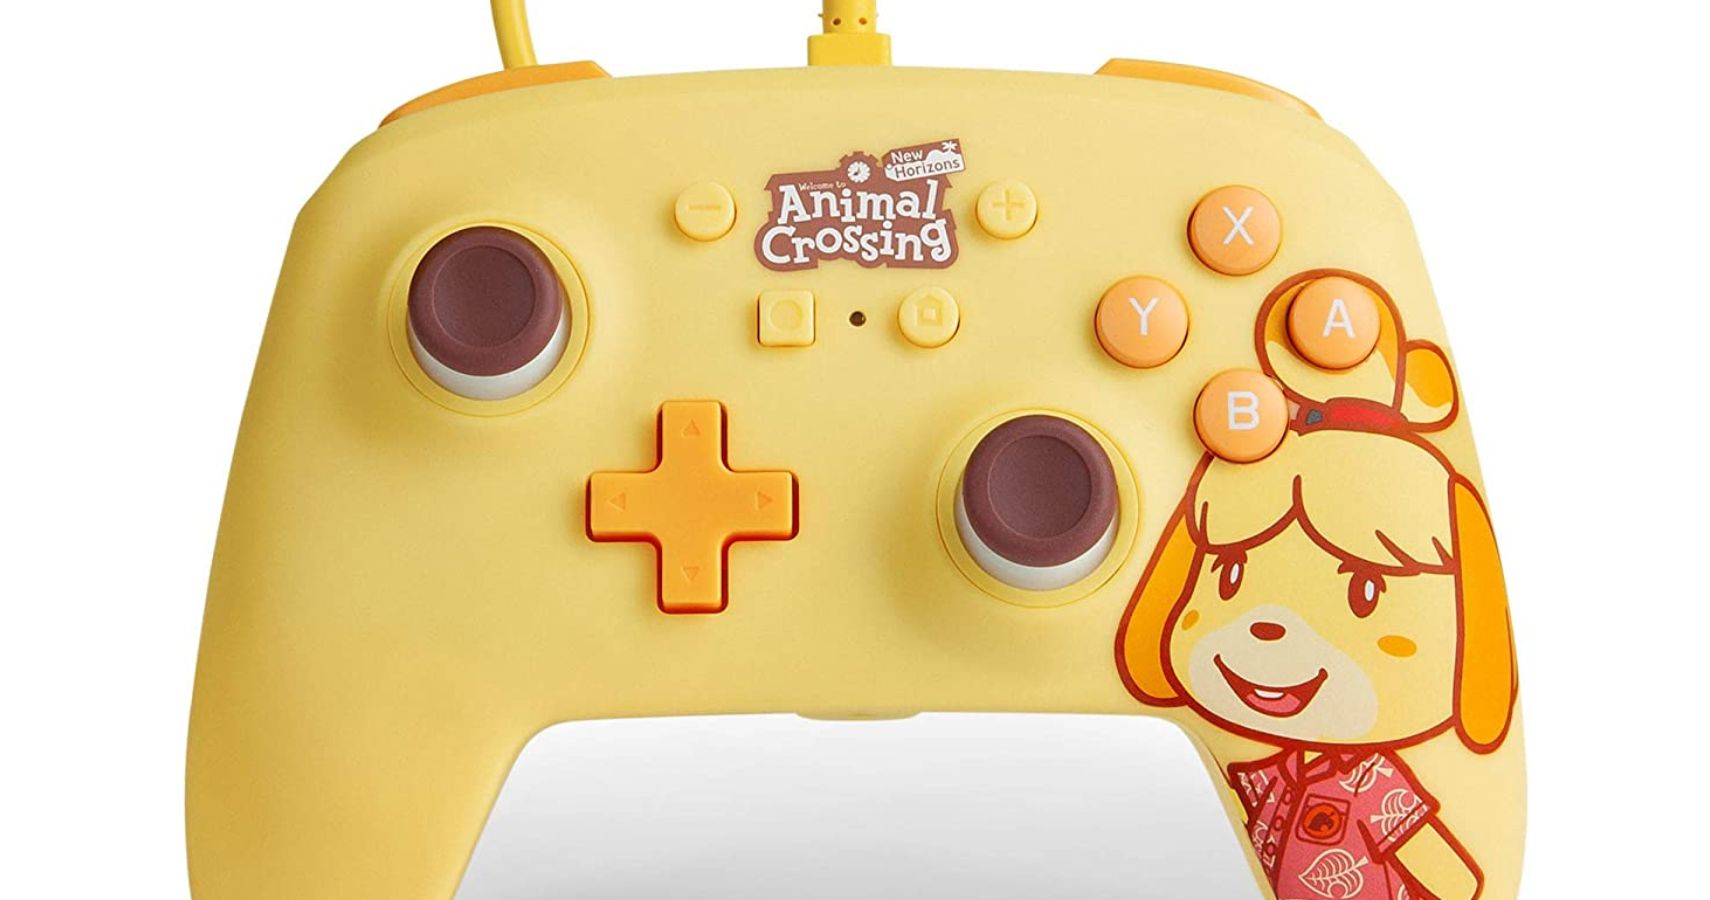 PreOrder These Adorable New Animal Crossing New Horizons Nintendo Switch Controllers